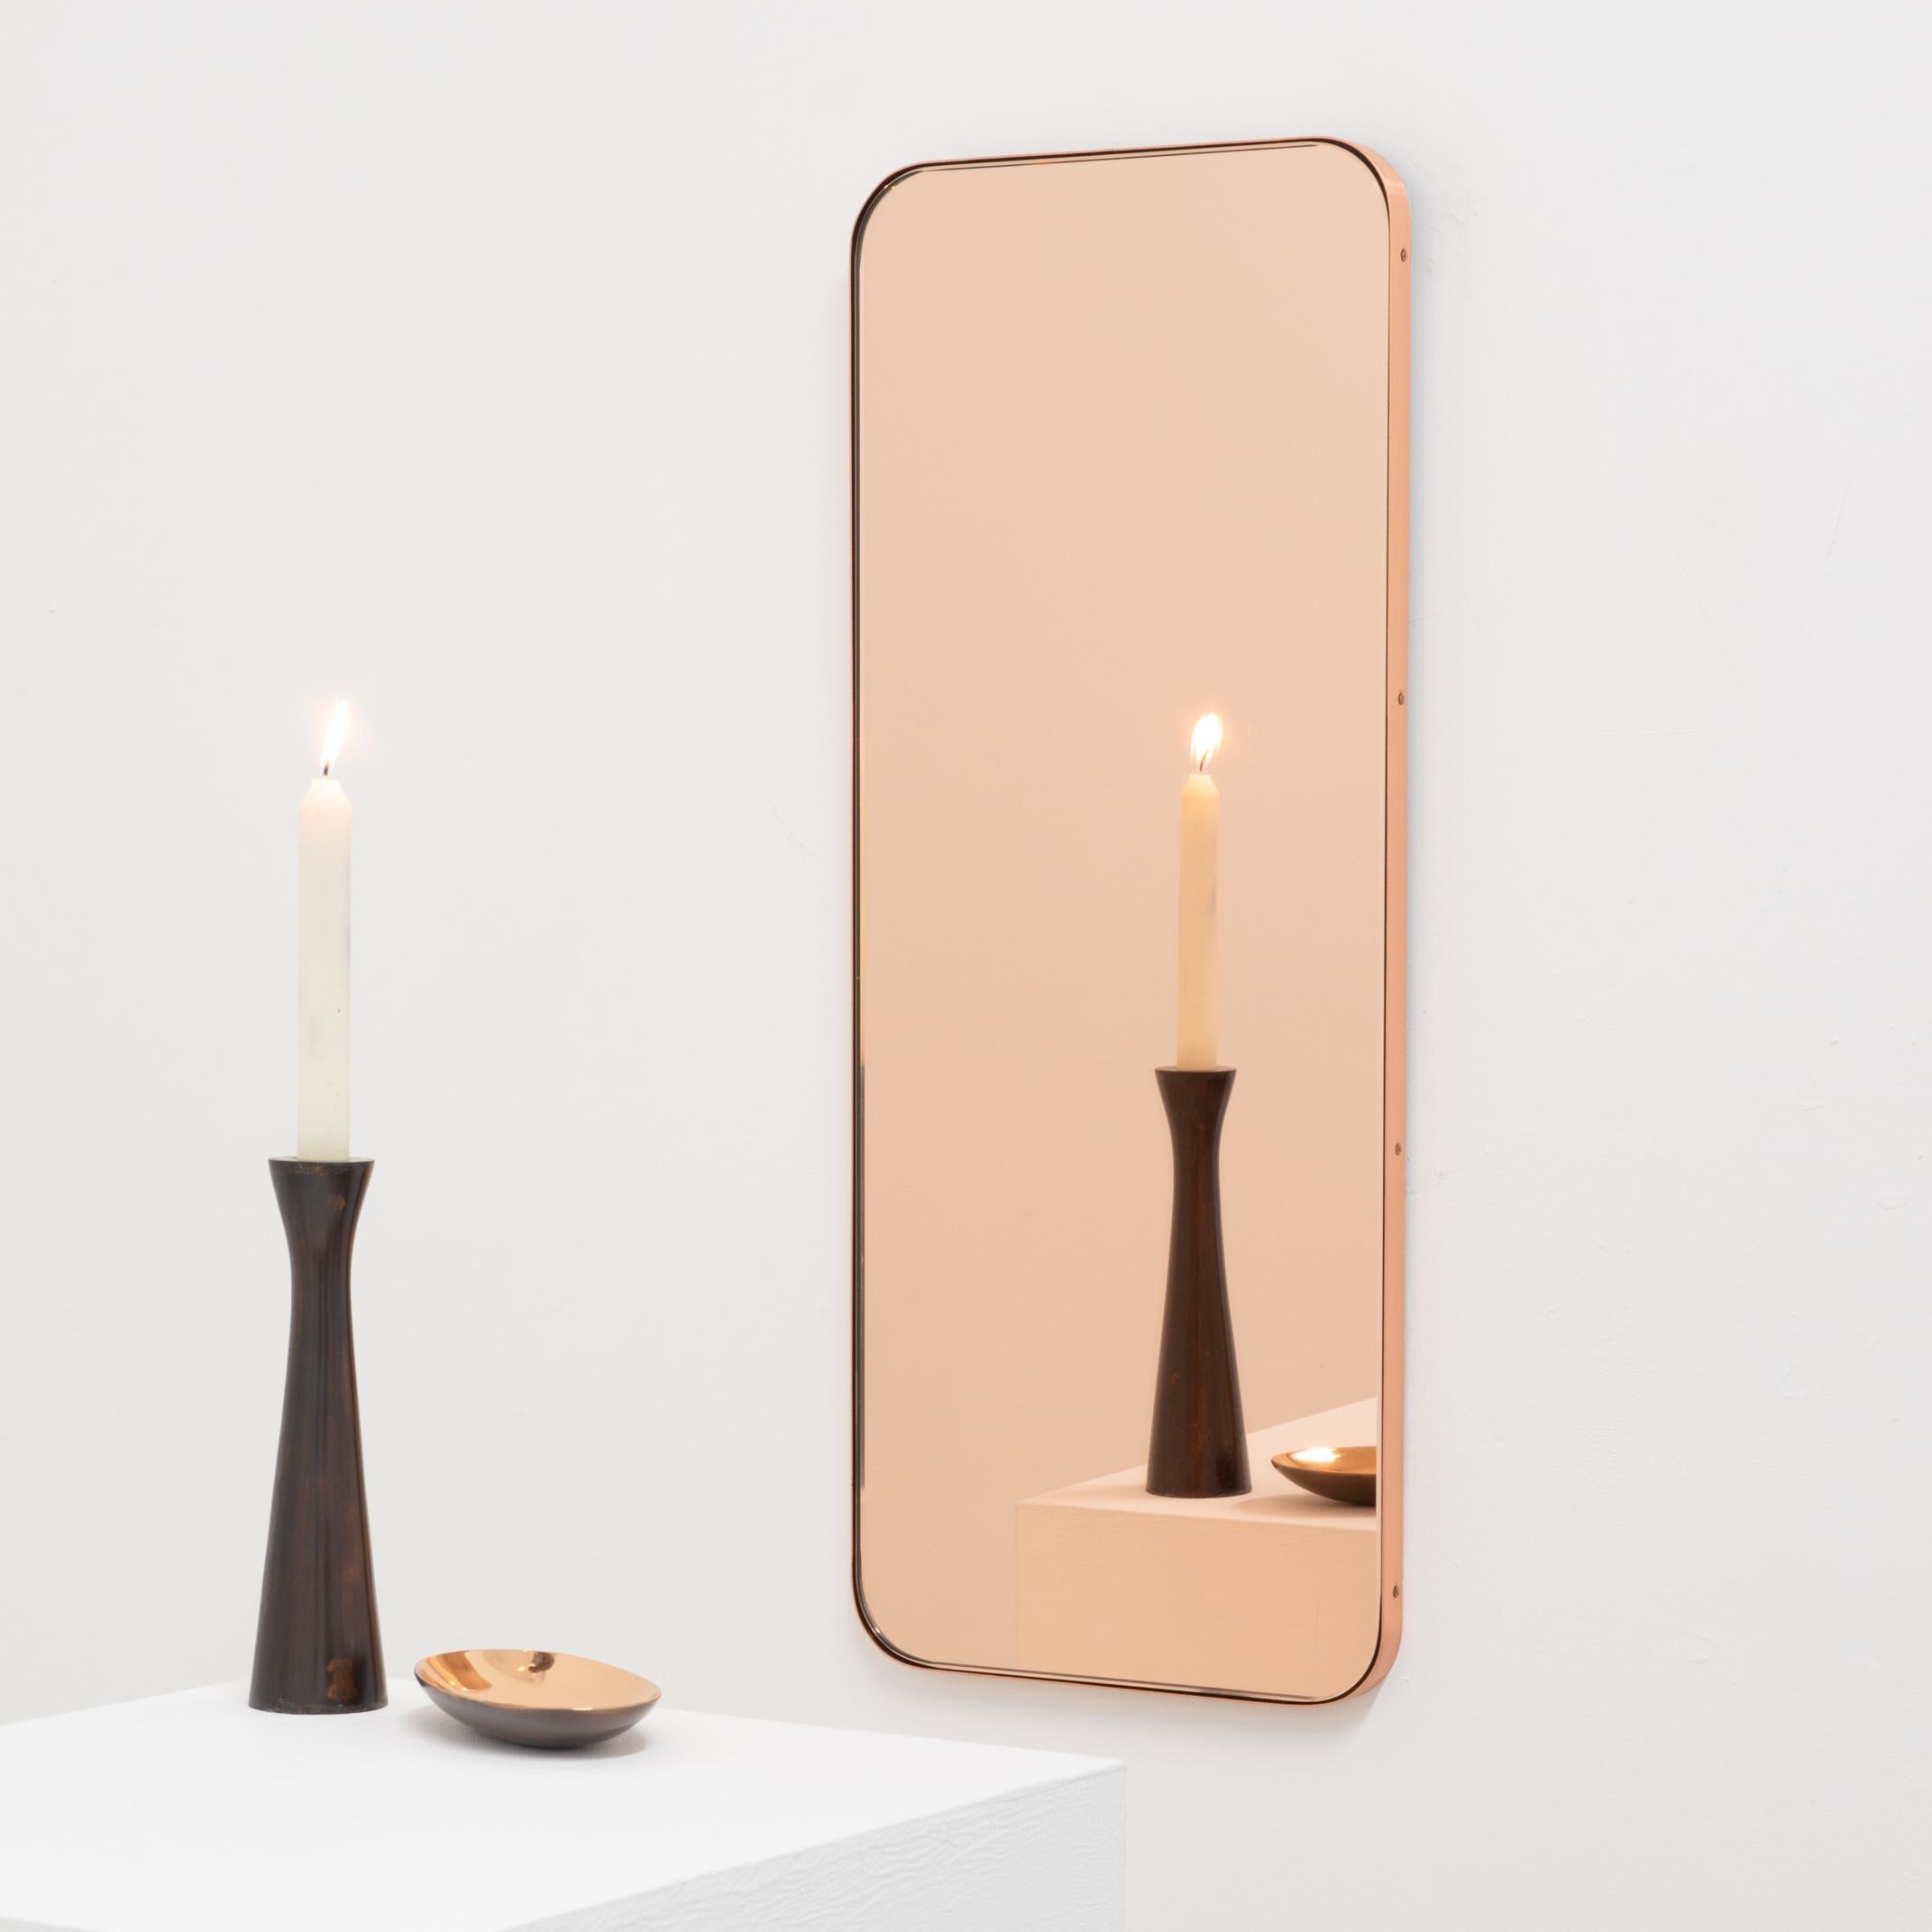 Brushed In Stock Quadris Rectangular Rose Gold Mirror, Copper Frame, Small For Sale